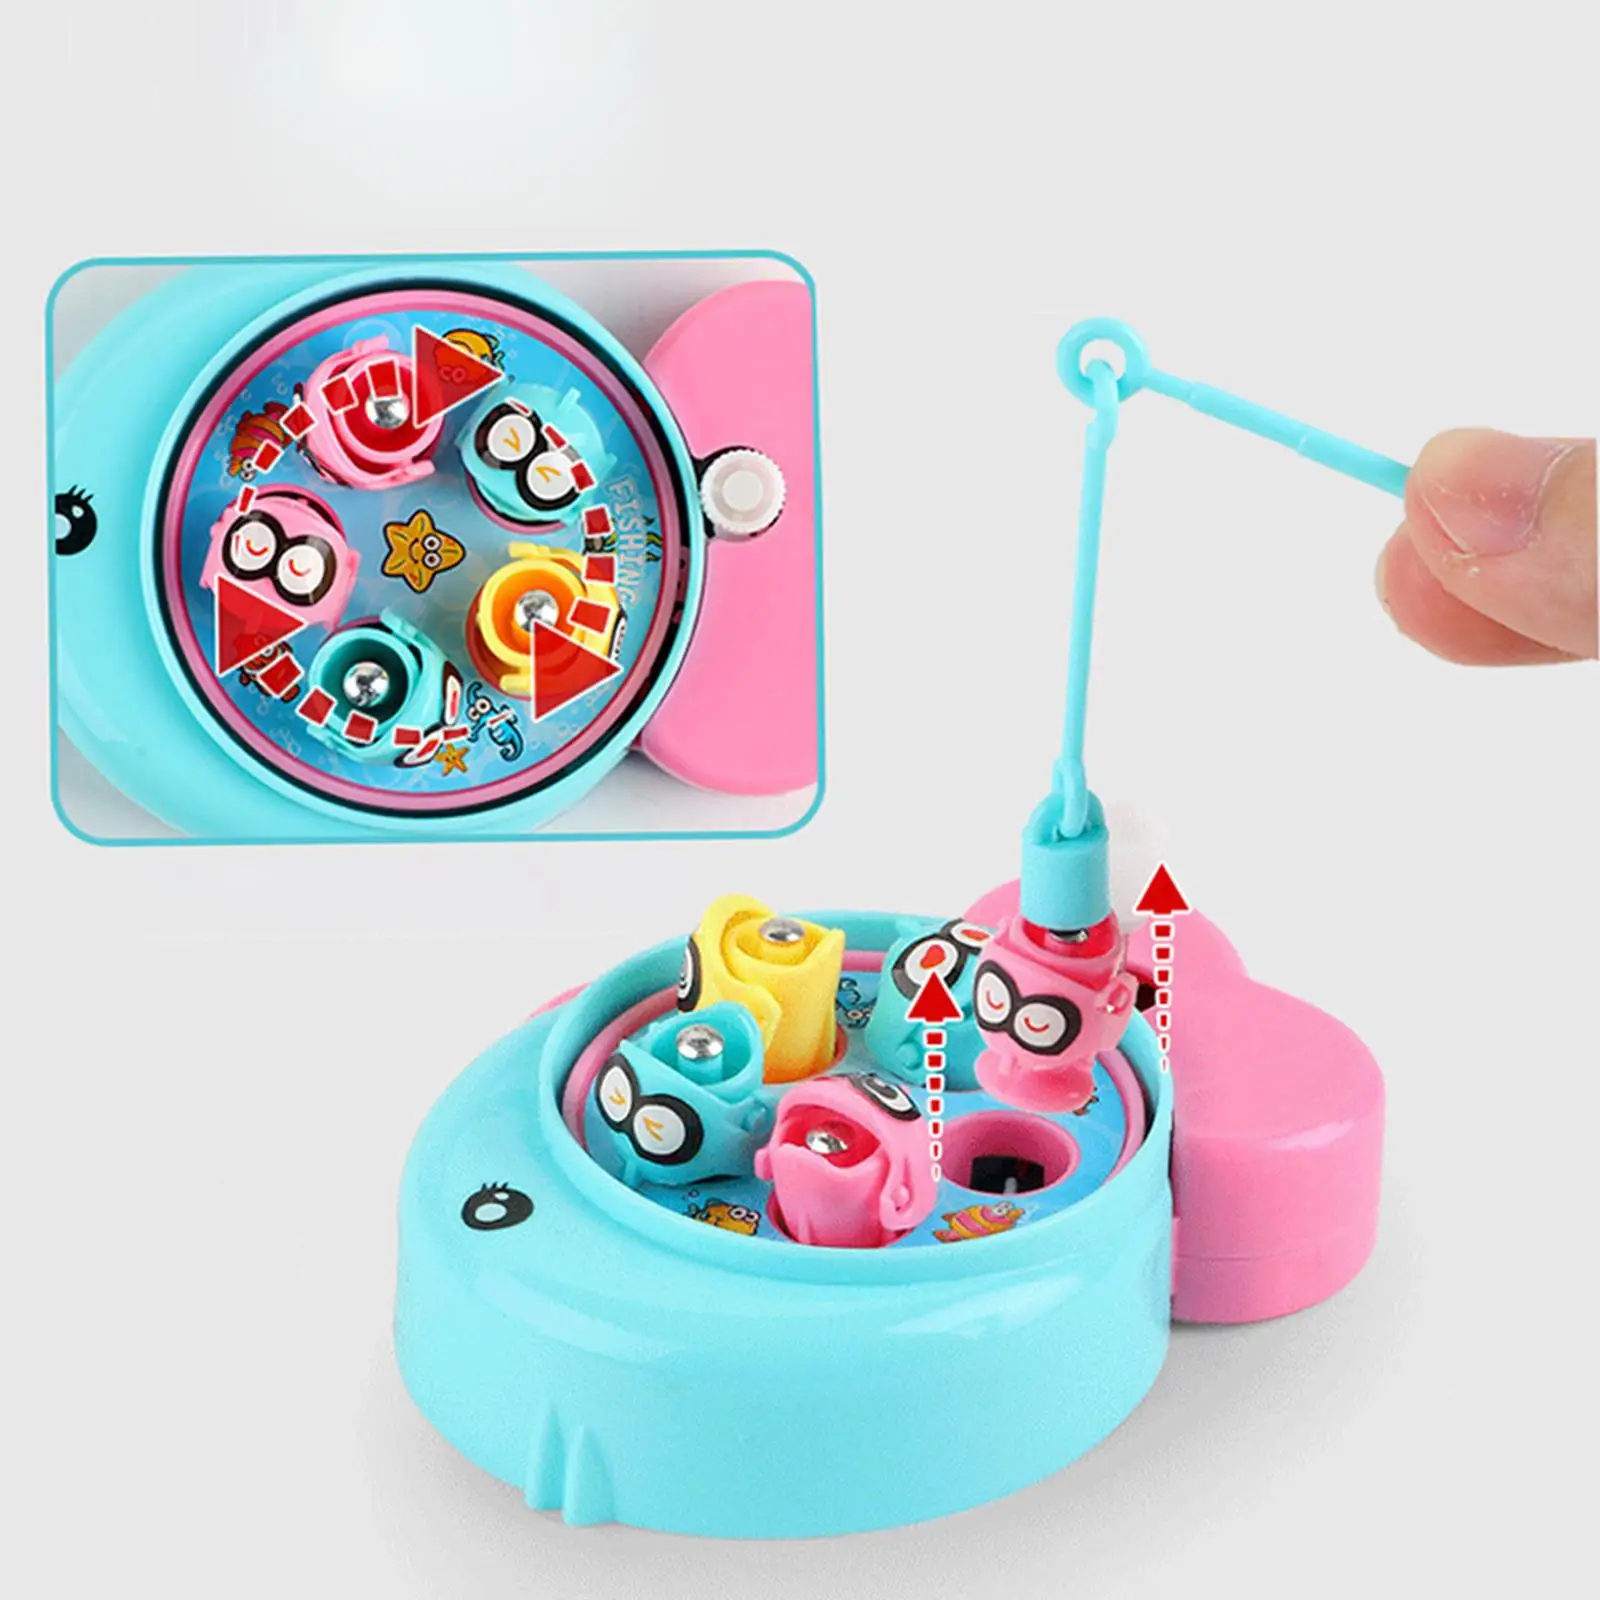 Fishing Game Toy Motor Skills Interactive Toys for Toddlers Birthday Gifts